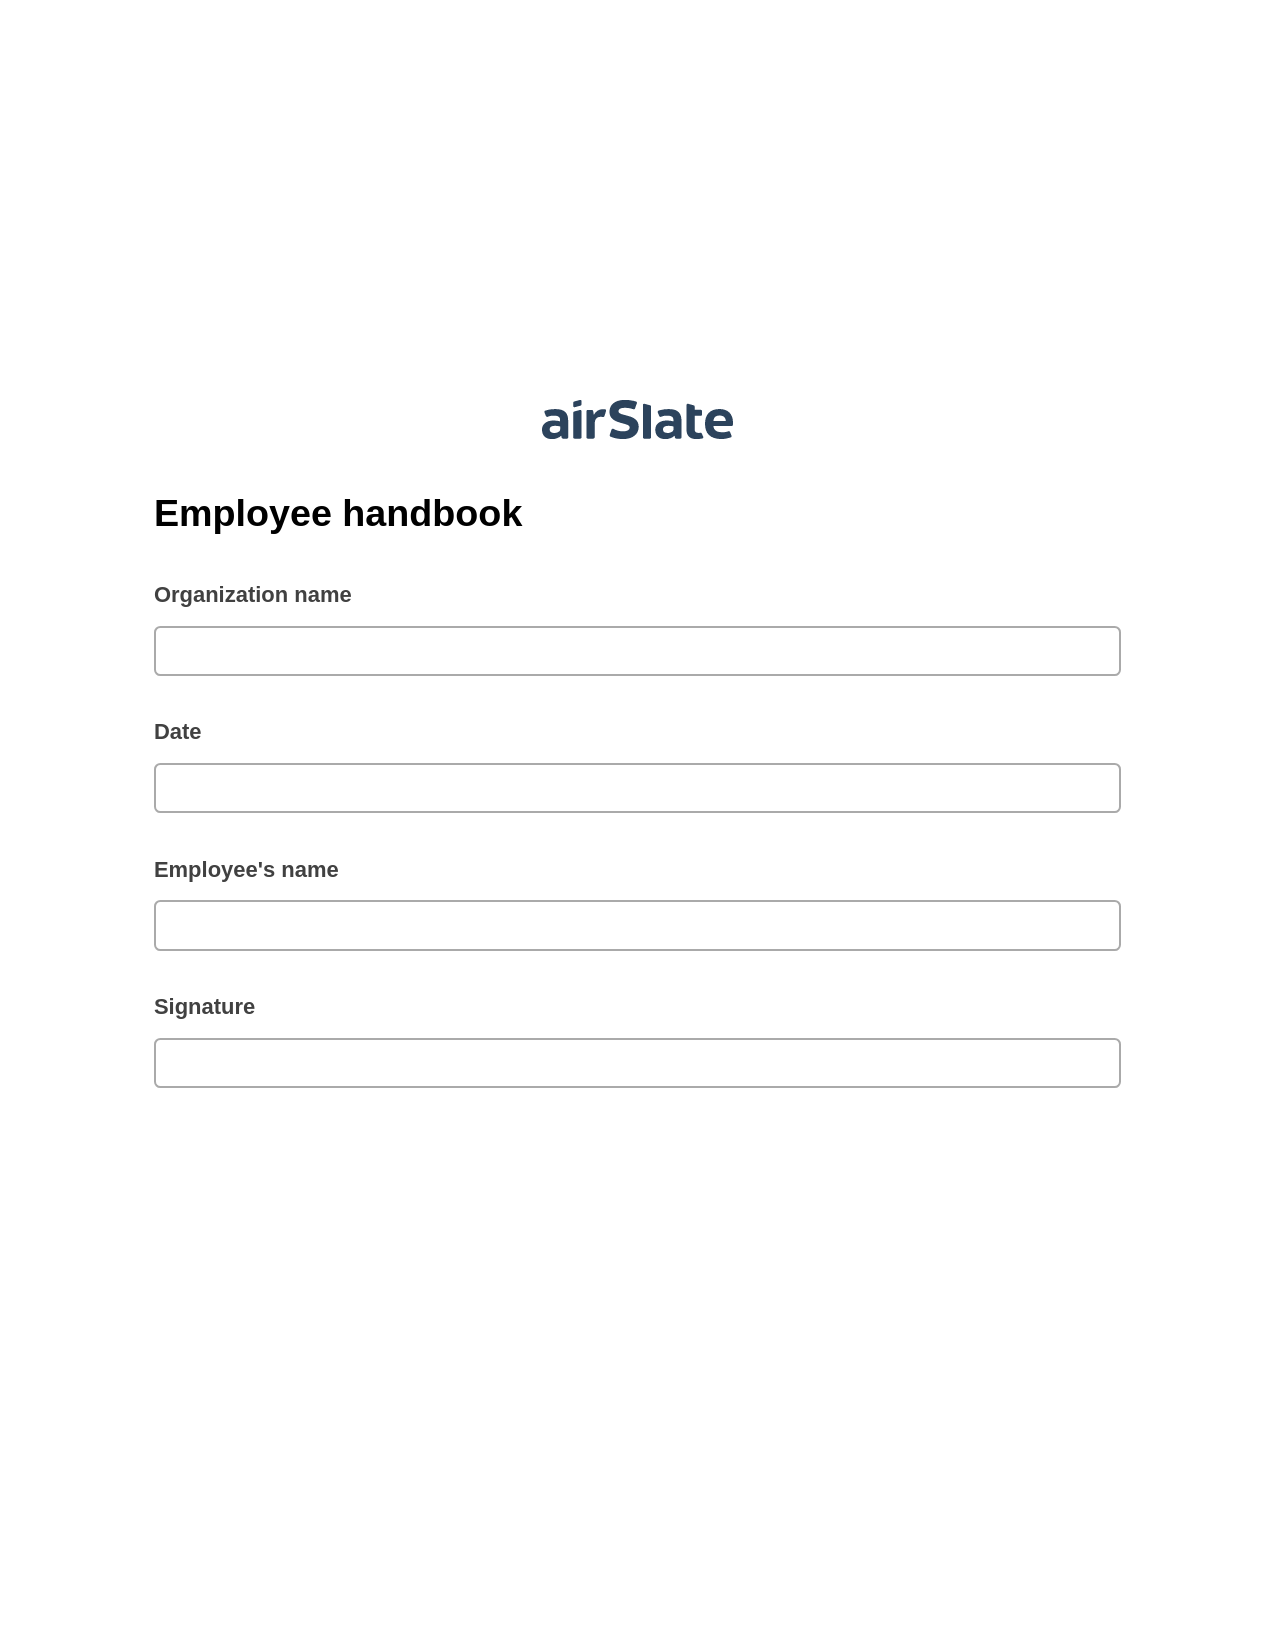 Multirole Employee handbook Pre-fill from another Slate Bot, Reminder Bot, Export to Excel 365 Bot